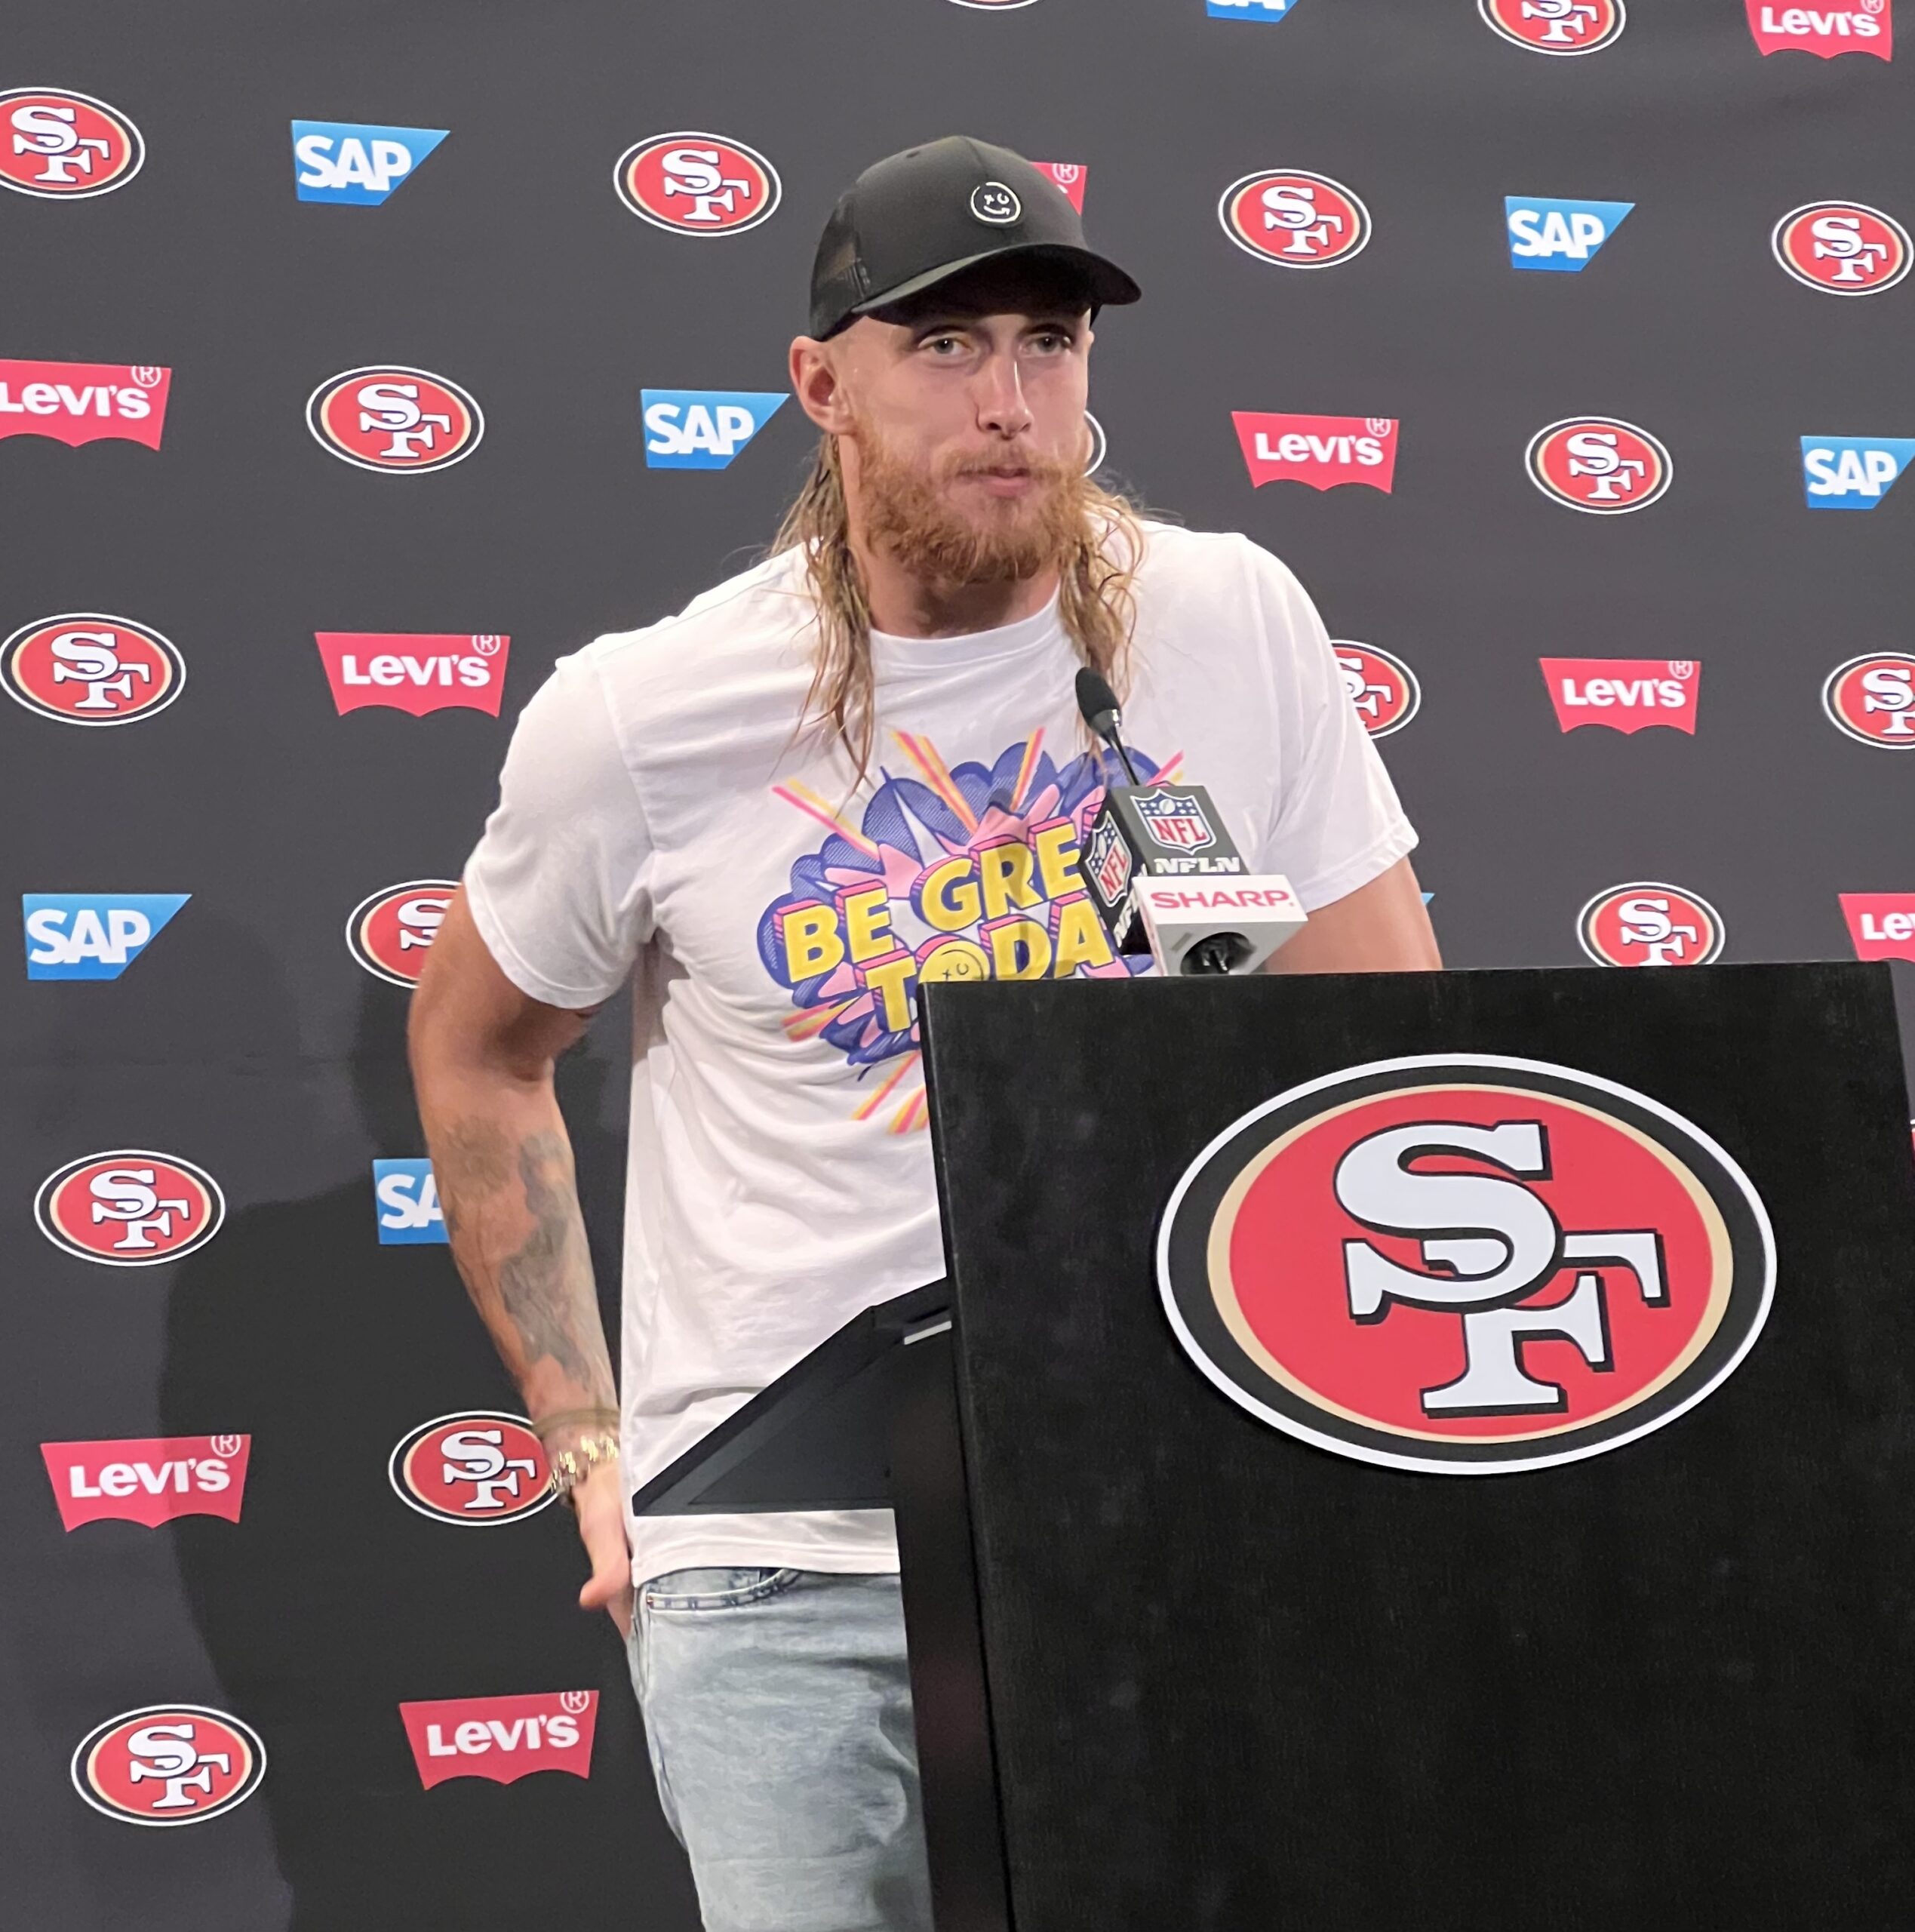 ‘The play’s being called right now. What are you doing?!’ 49ers TE George Kittle Always Finds the Fun in Football